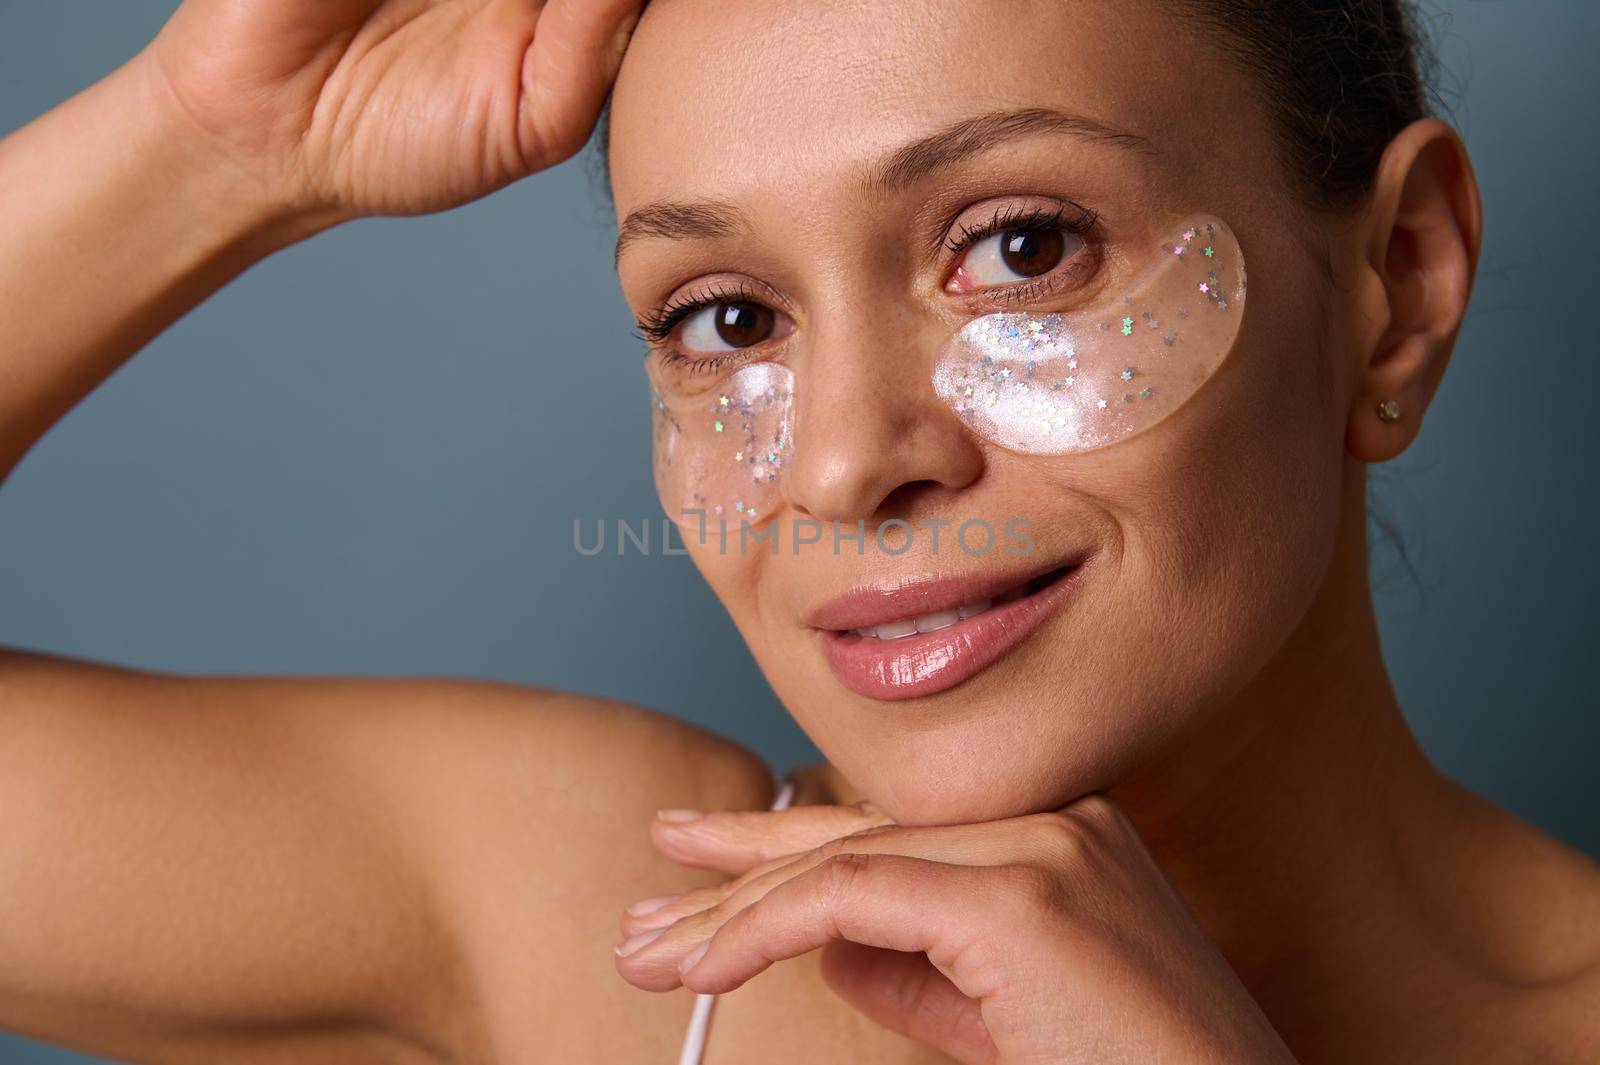 Close-up portrait of an attractive smiling woman applying gold medical hydrogel collagen eye patches to reduce bags under her eyes and puffiness, posing at camera against a gray background. Copy space by artgf